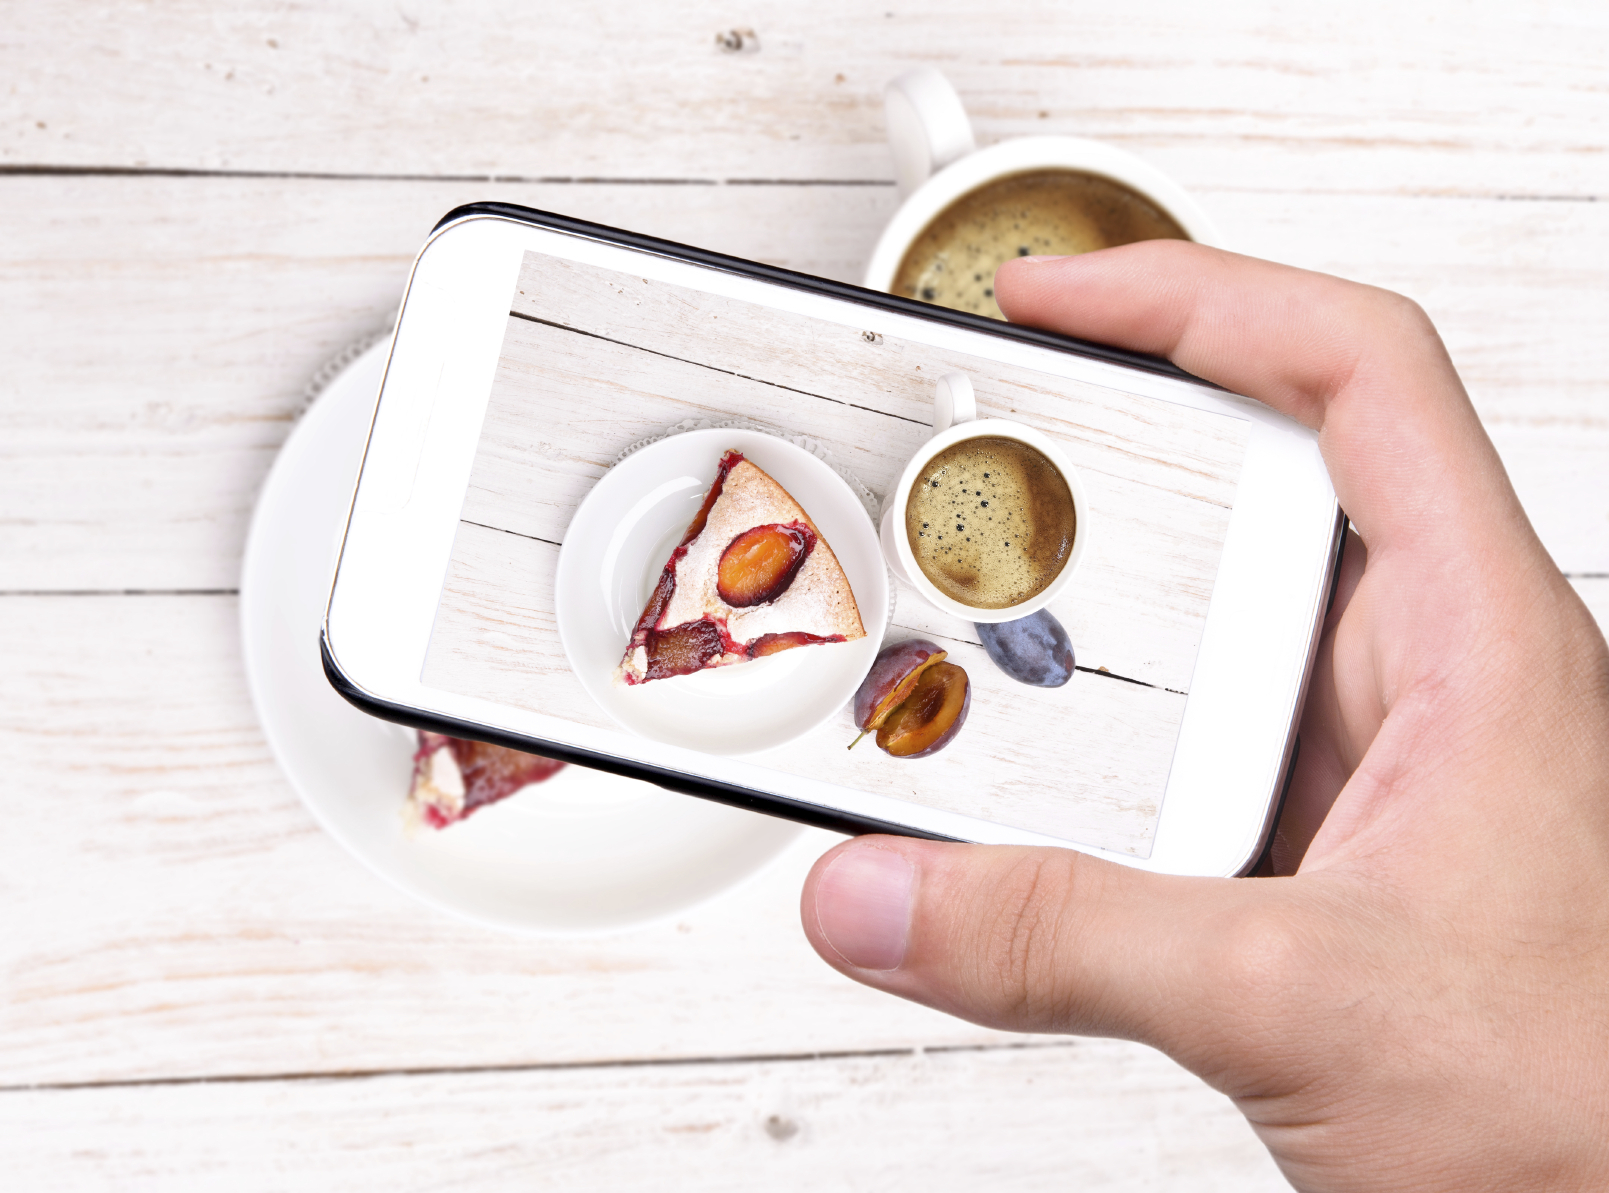 Arriva Influency, the app that gives discounts to those who share the pictures of the dishes